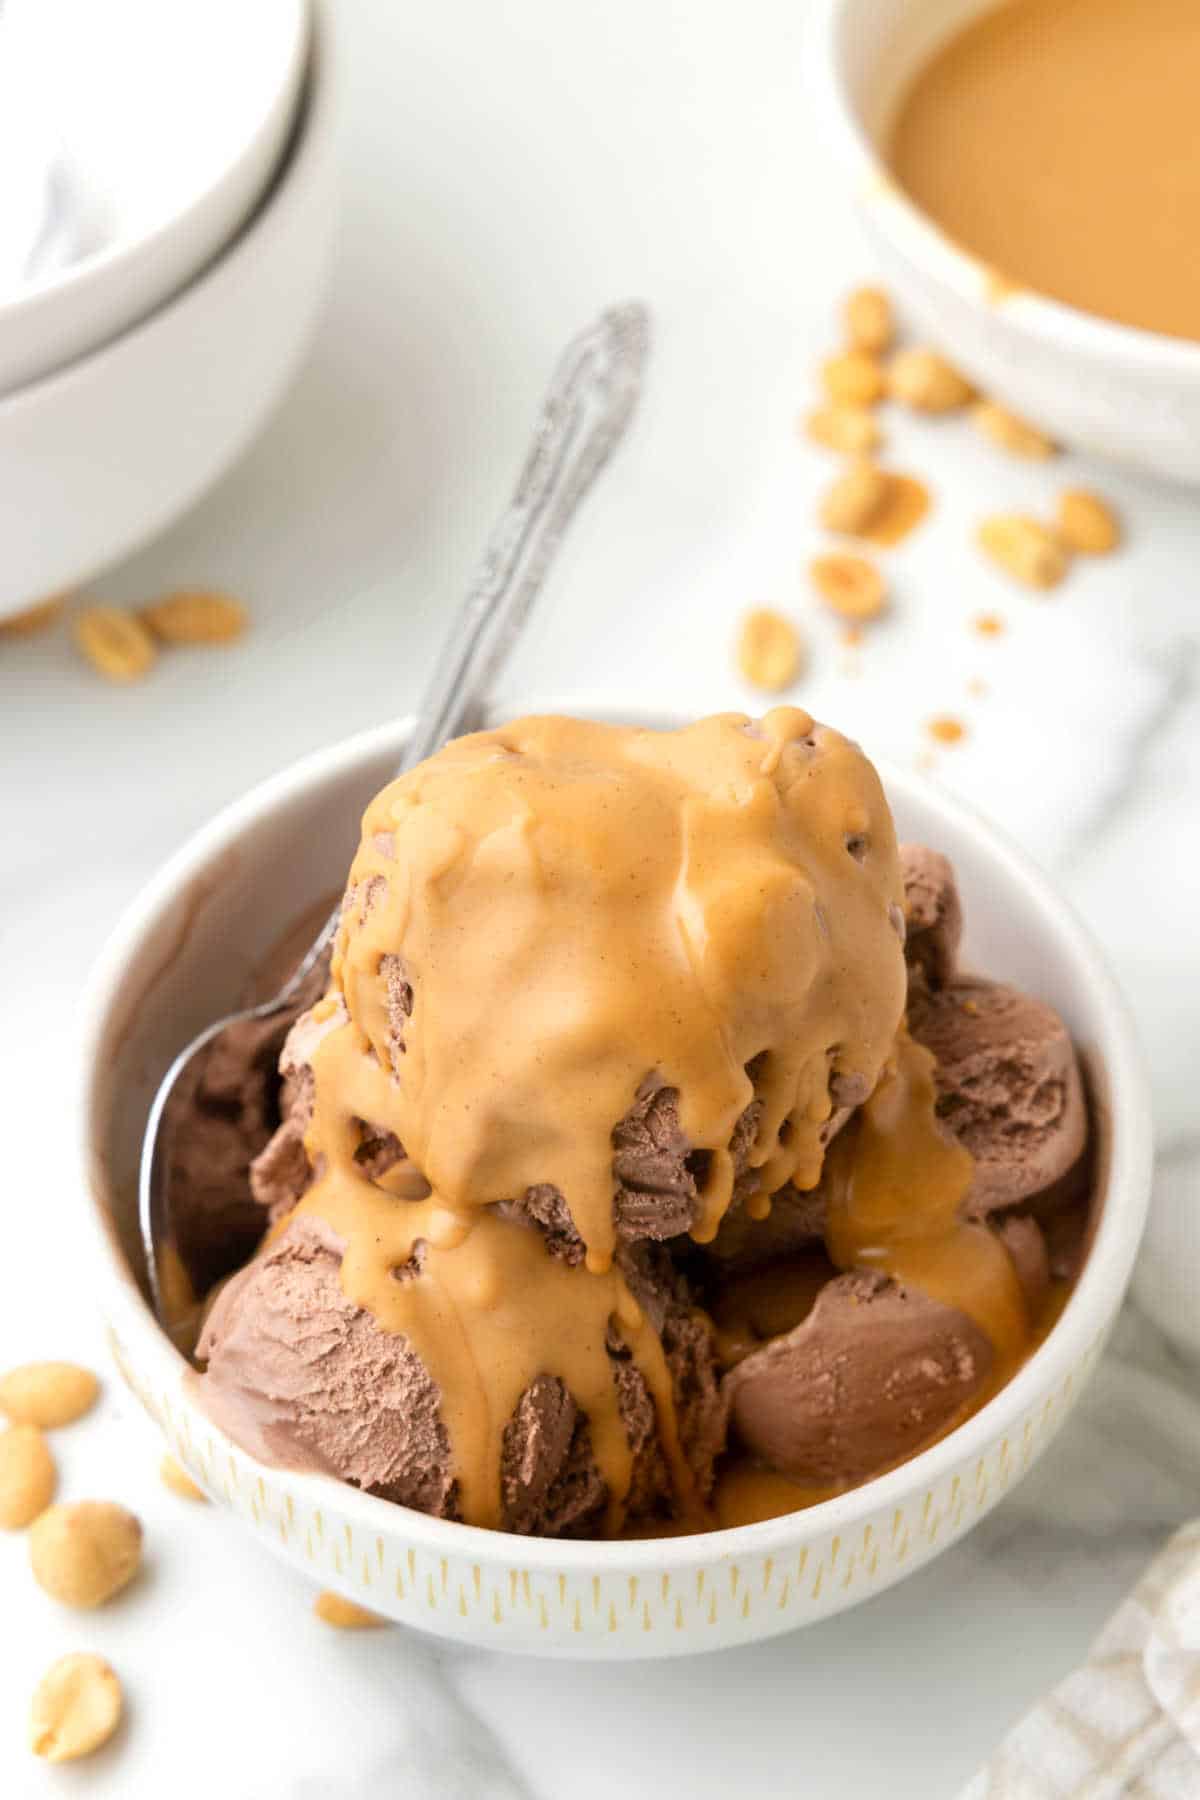 Peanut butter magic shell on chocolate ice cream in a white bowl.